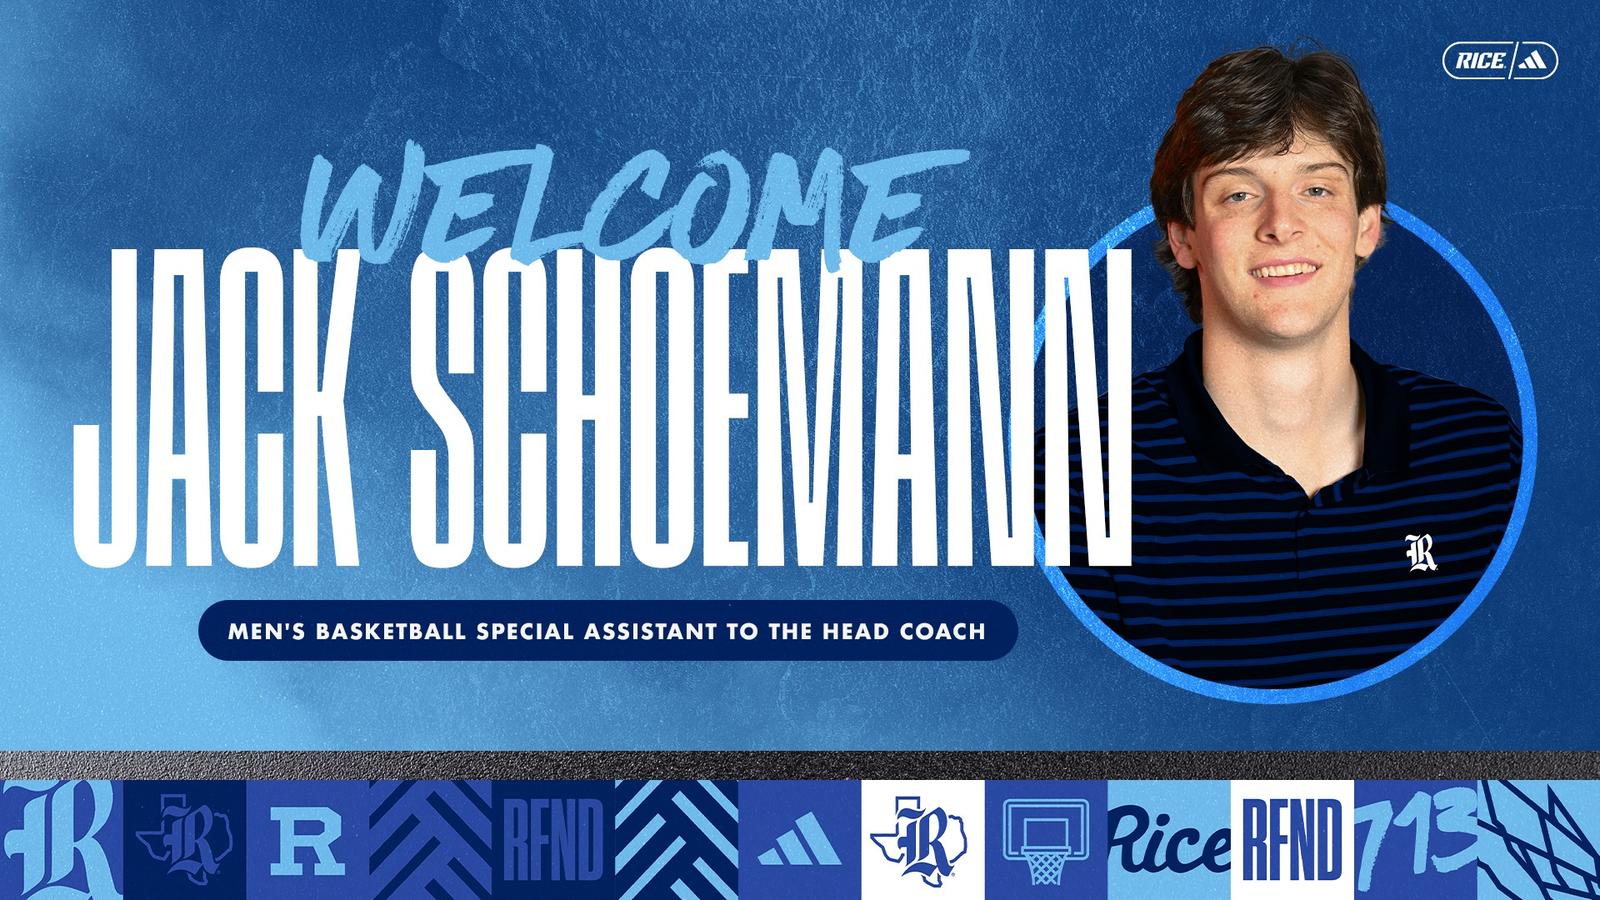 Jack Schoemann Named Men’s Basketball Special Assistant to the Head Coach